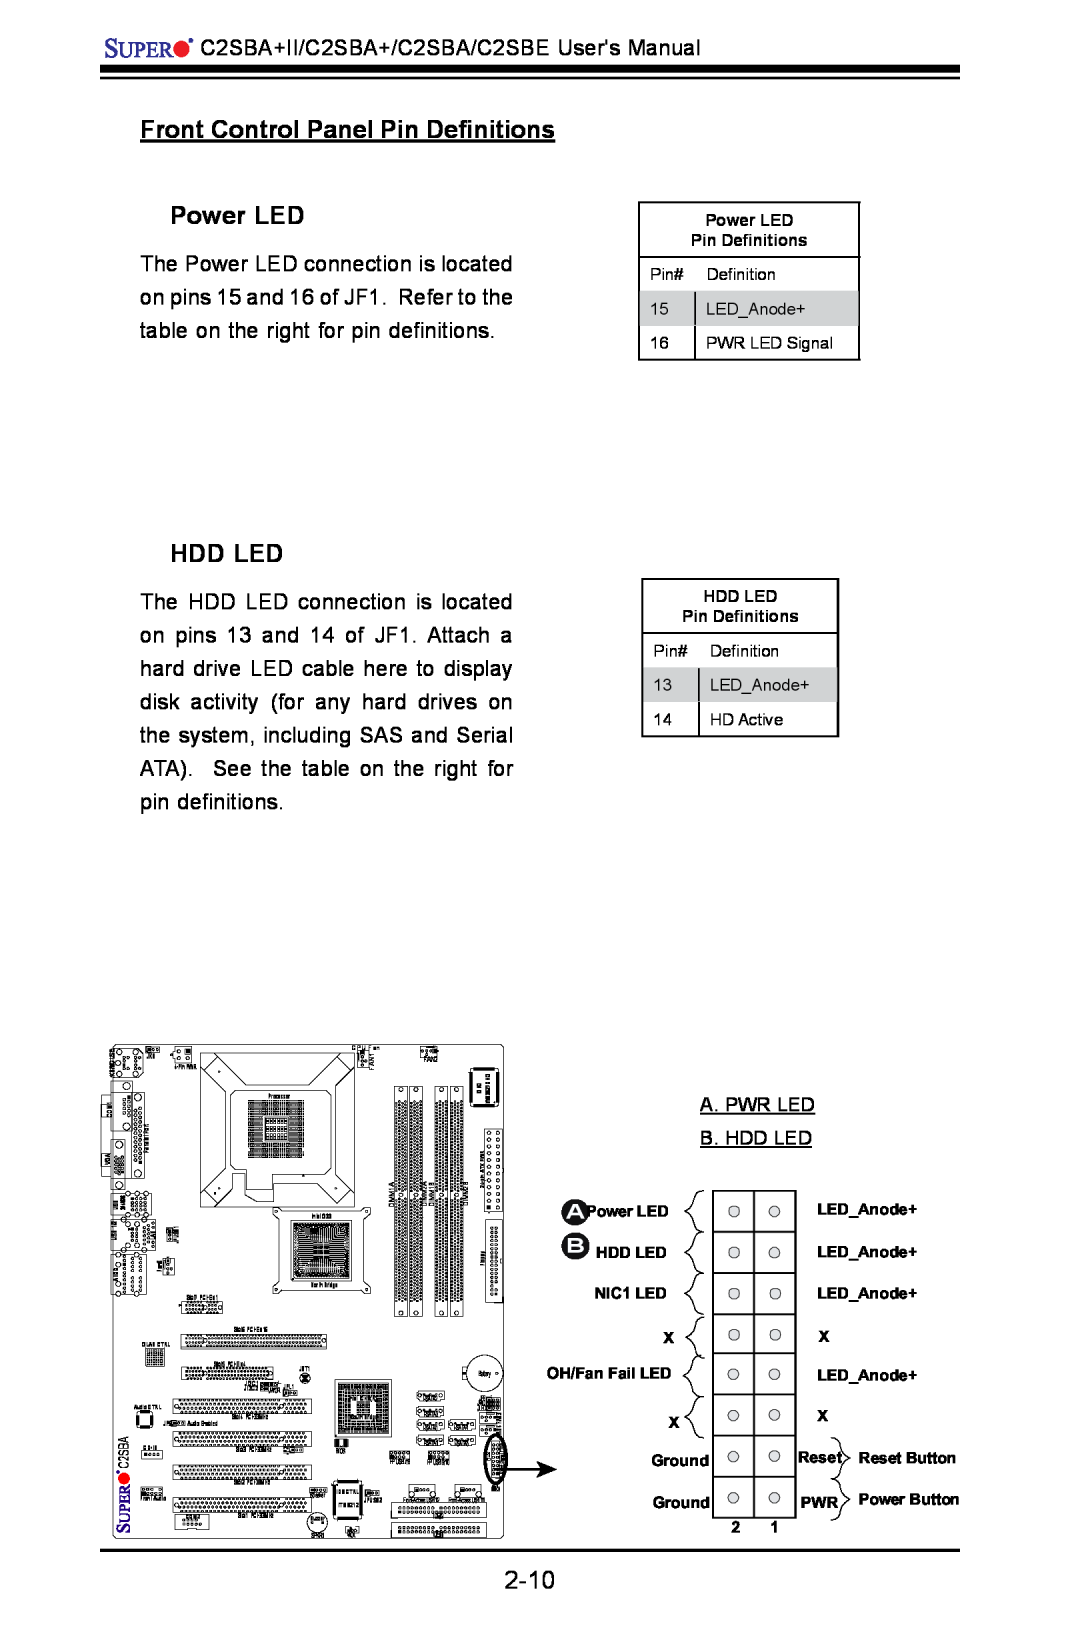 SUPER MICRO Computer C2SBE, C2SBA+II user manual Front Control Panel Pin Definitions Power LED, A. Pwr Led B. Hdd Led 